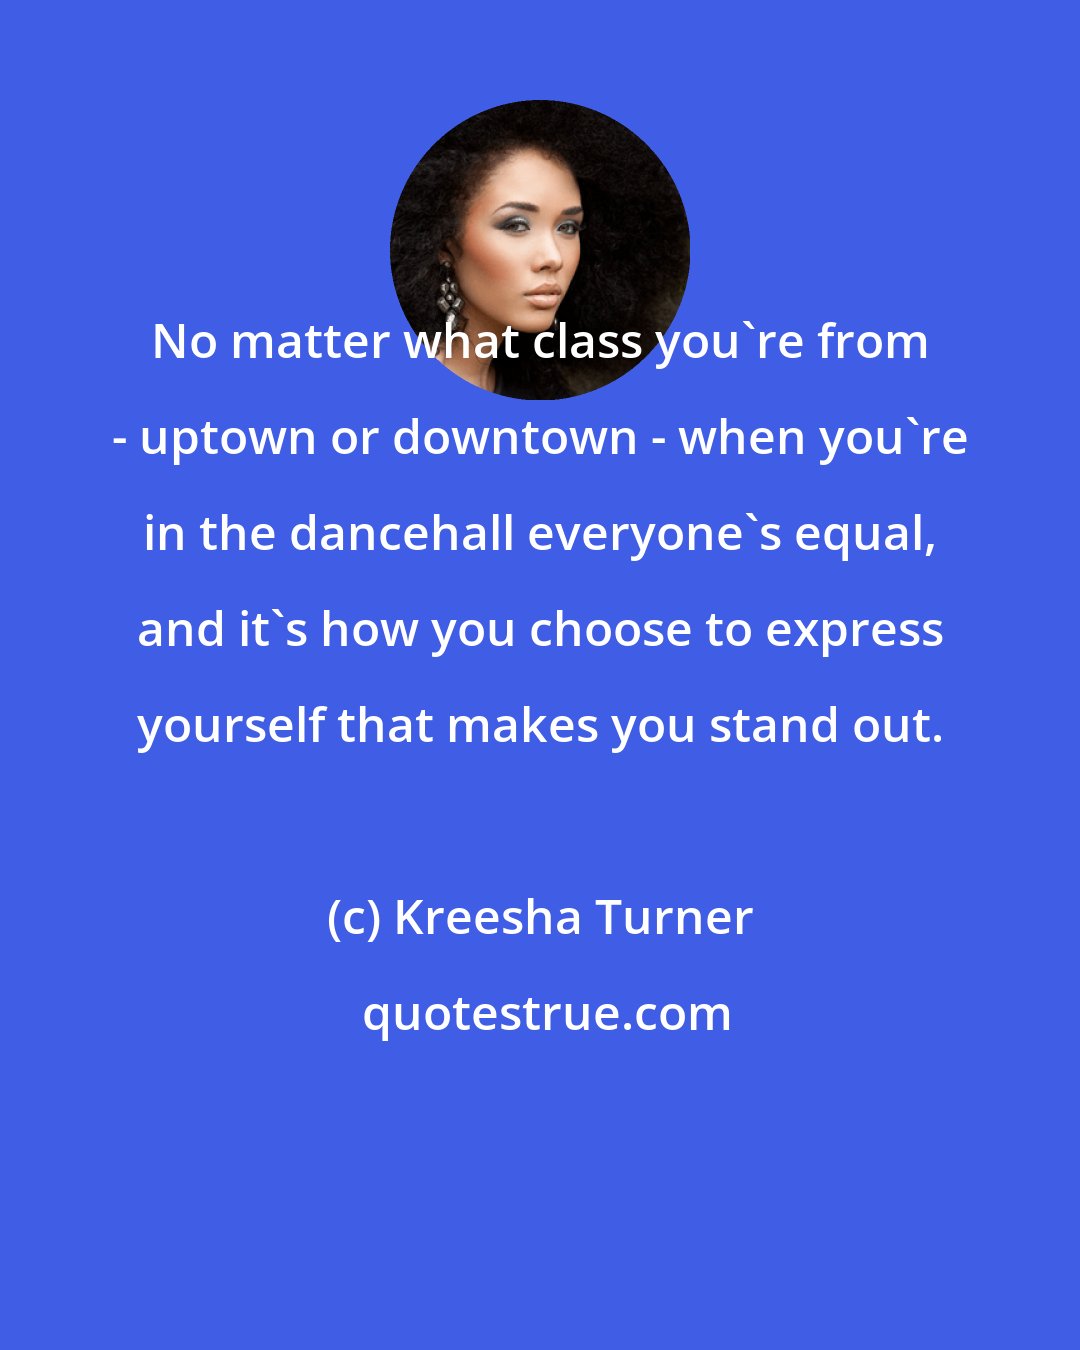 Kreesha Turner: No matter what class you're from - uptown or downtown - when you're in the dancehall everyone's equal, and it's how you choose to express yourself that makes you stand out.